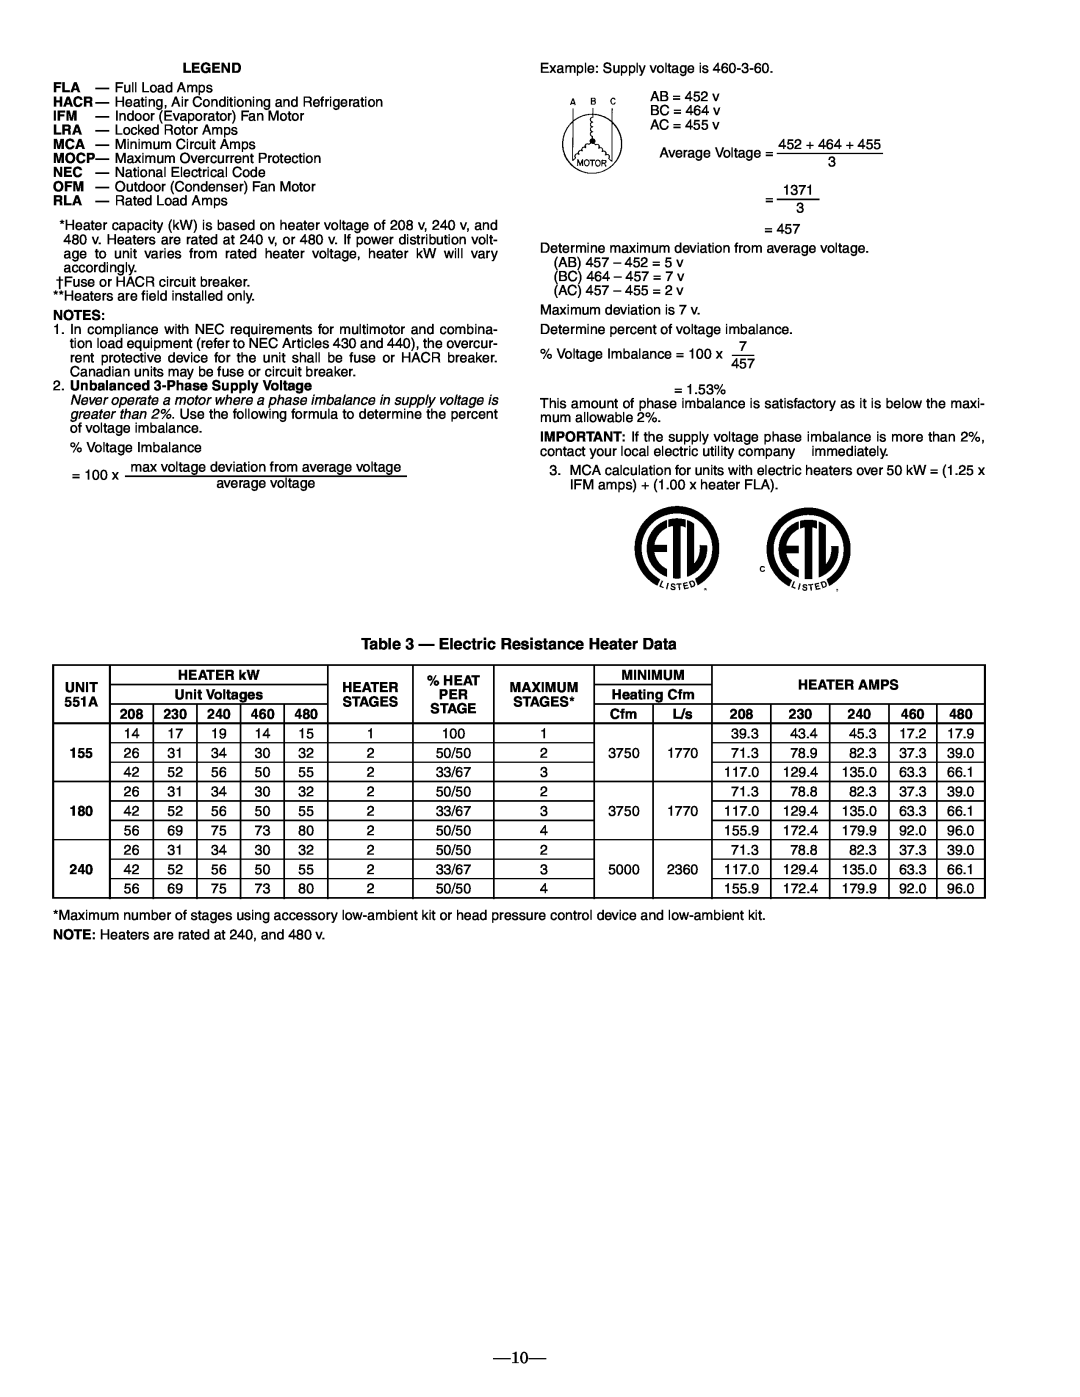 Bryant 551A operation manual 10, Electric Resistance Heater Data 